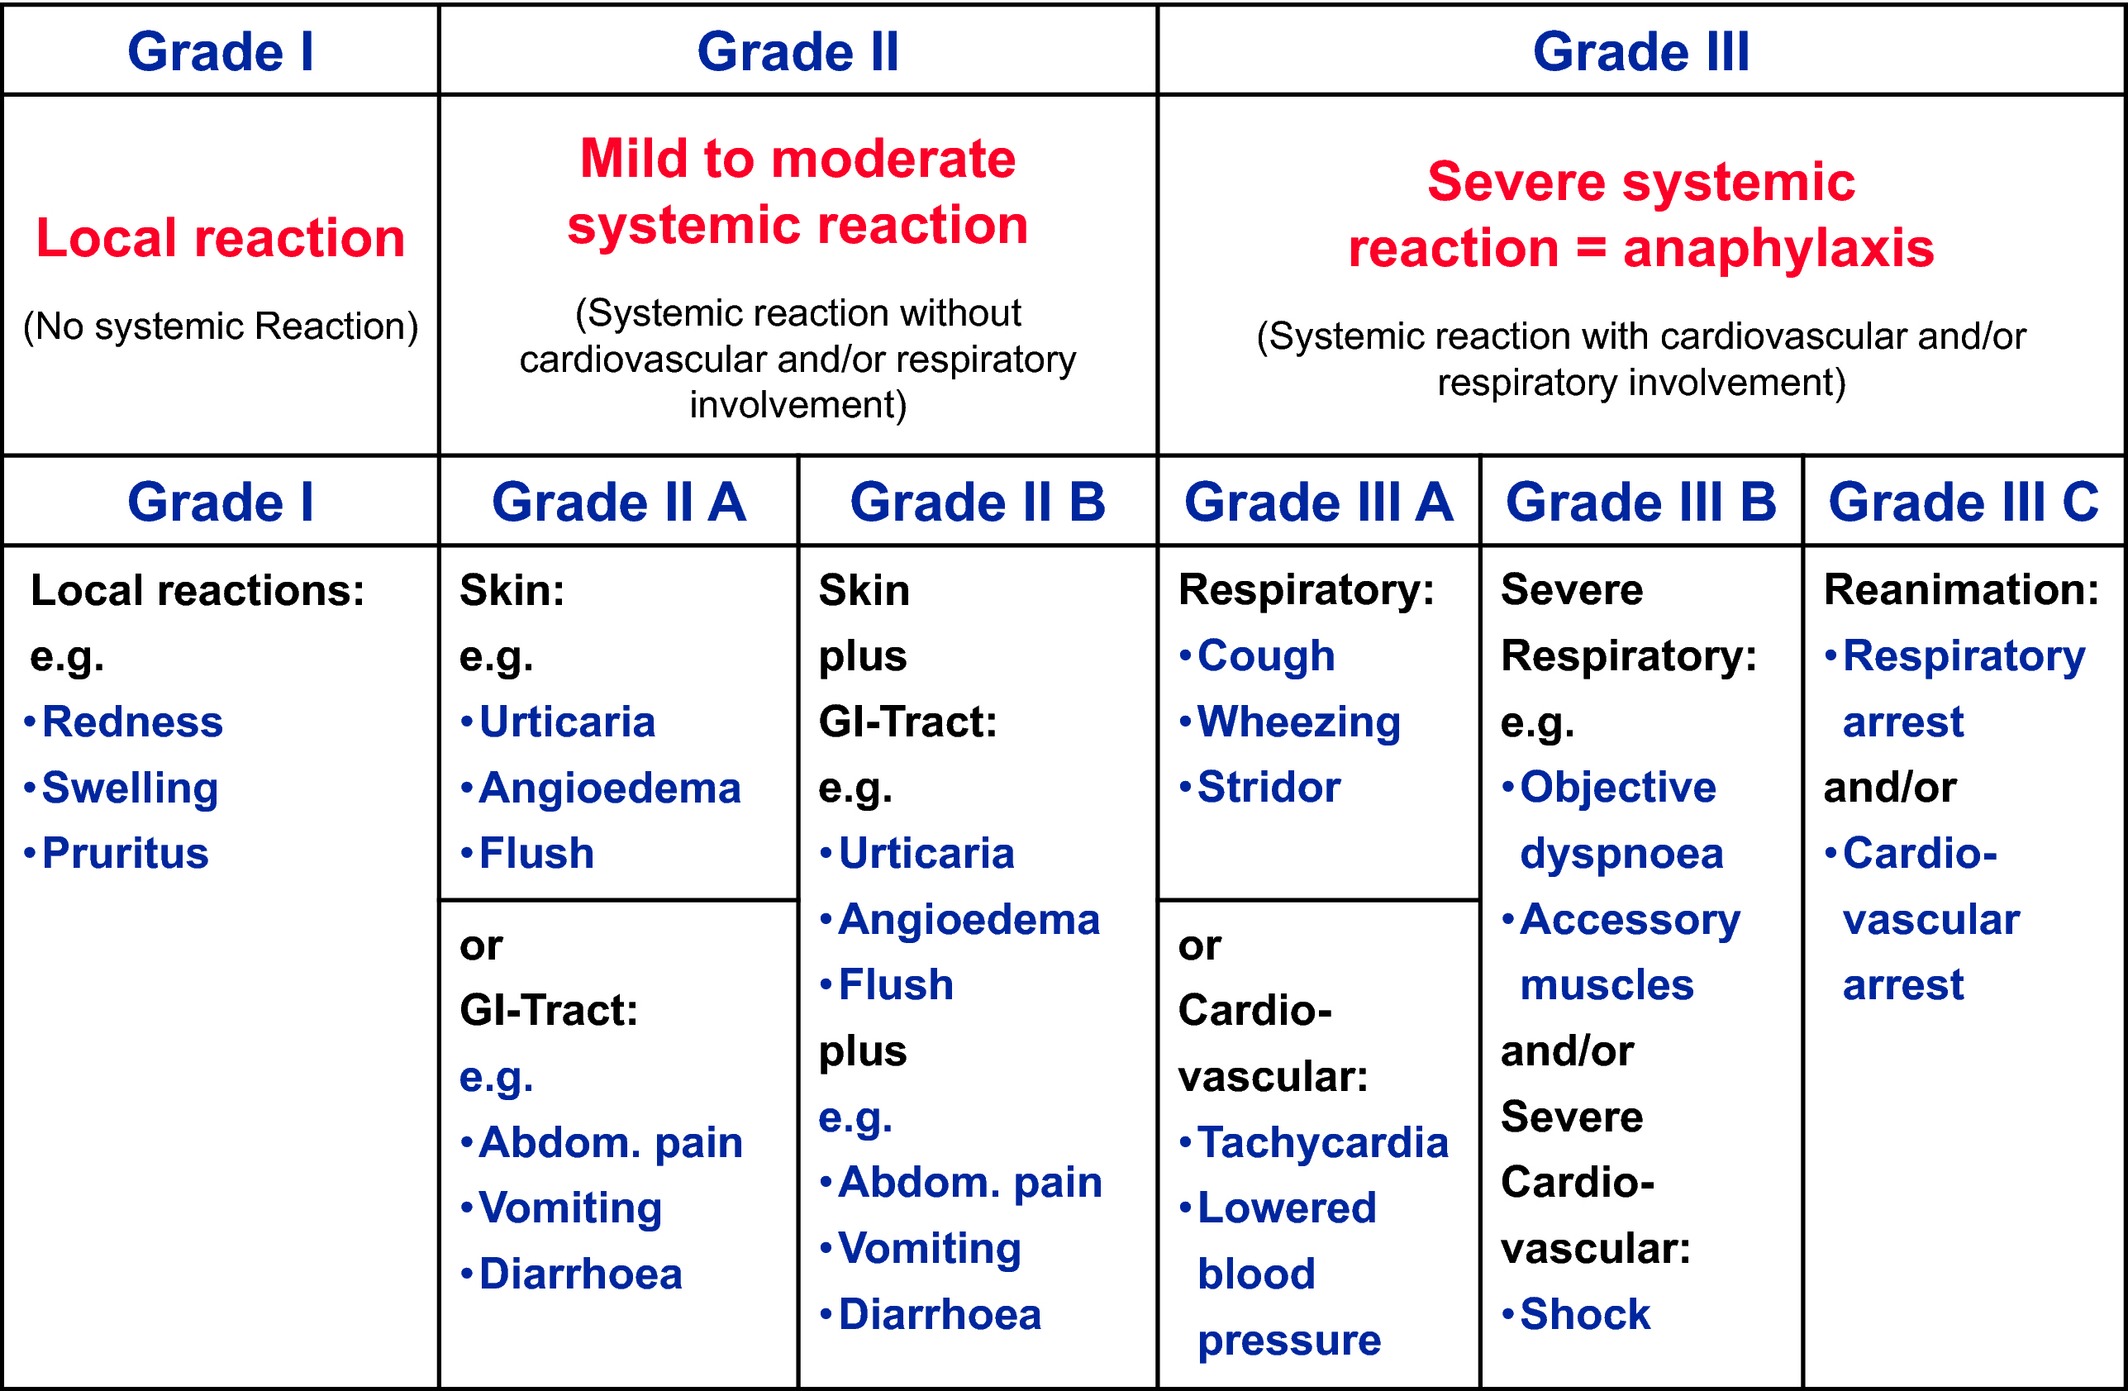 Proposal for a uniform grading system of allergic reactions